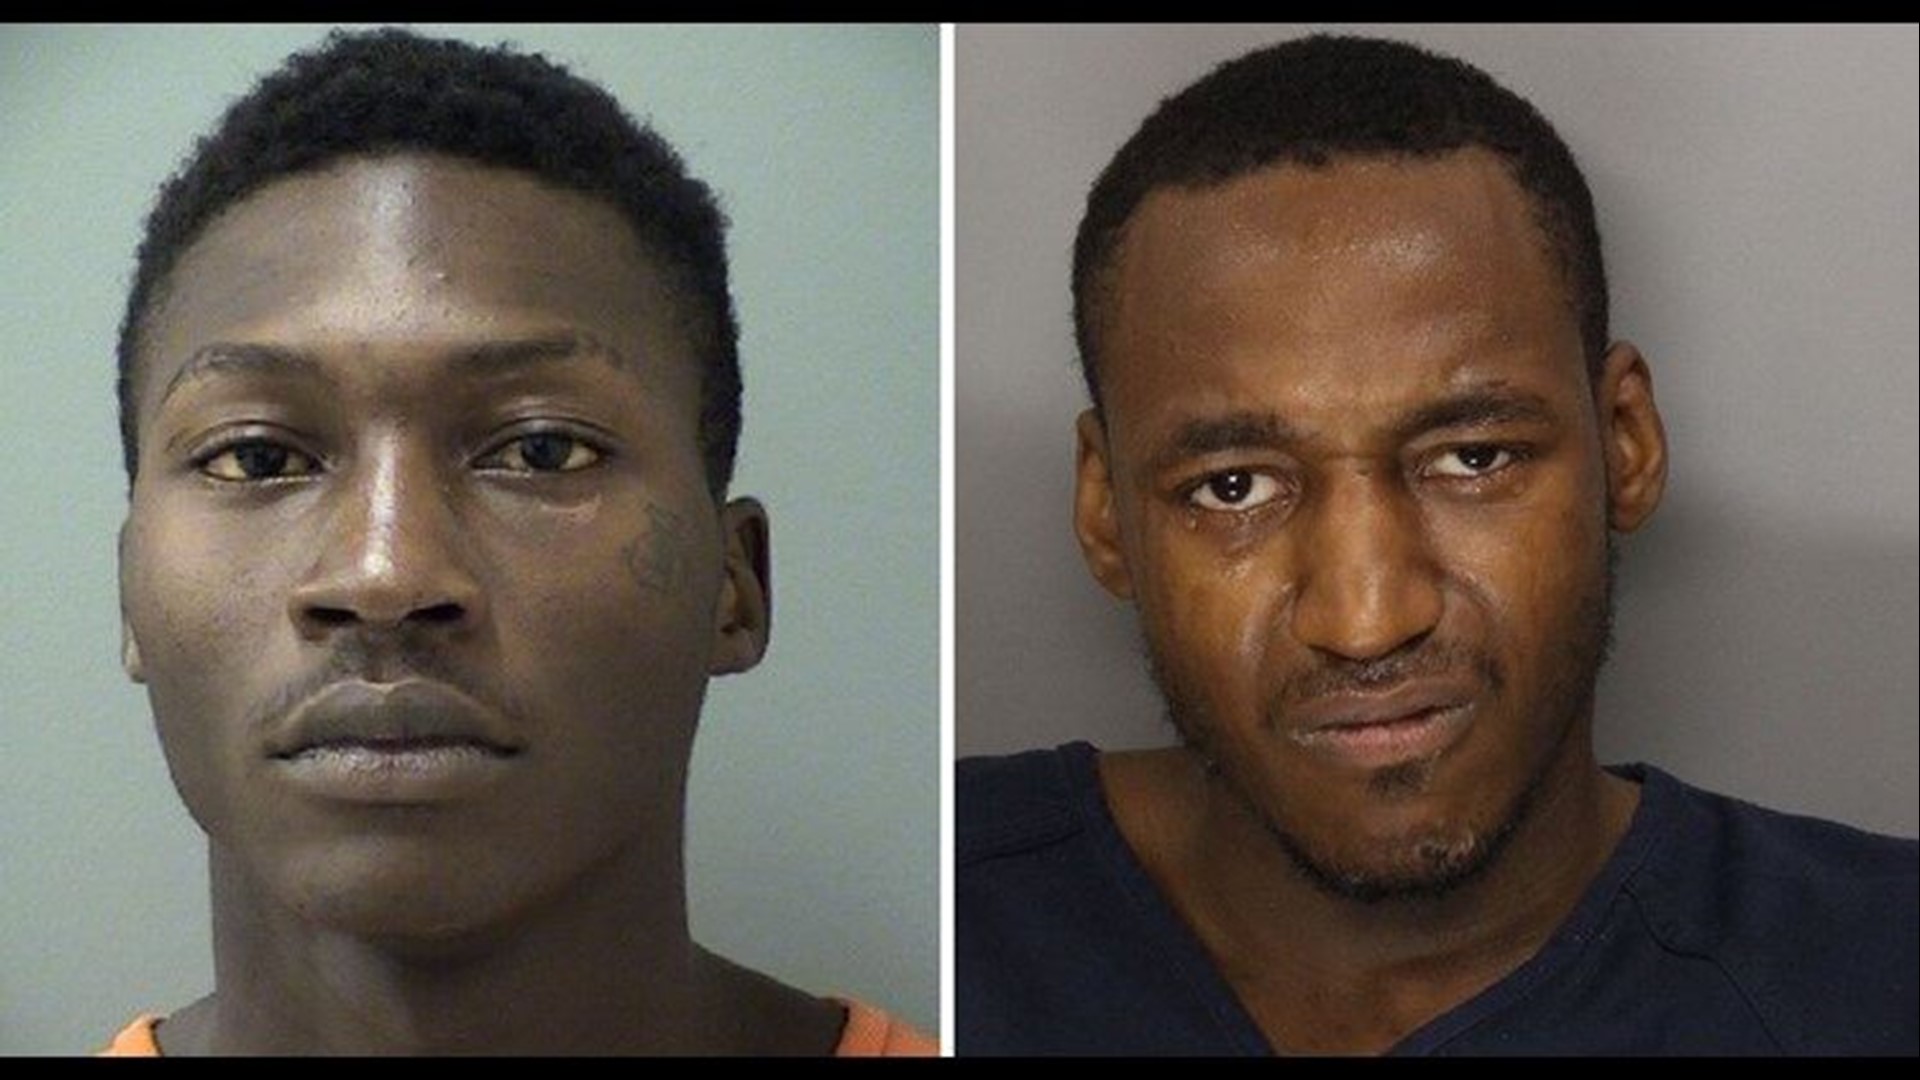 Demarious Kevauh Greene and Dylan Marquis Ledbetter both face life in prison without parole after a jury convicted them of murdering Anthony Welch outside the Pappadeaux restaurant in Marietta.